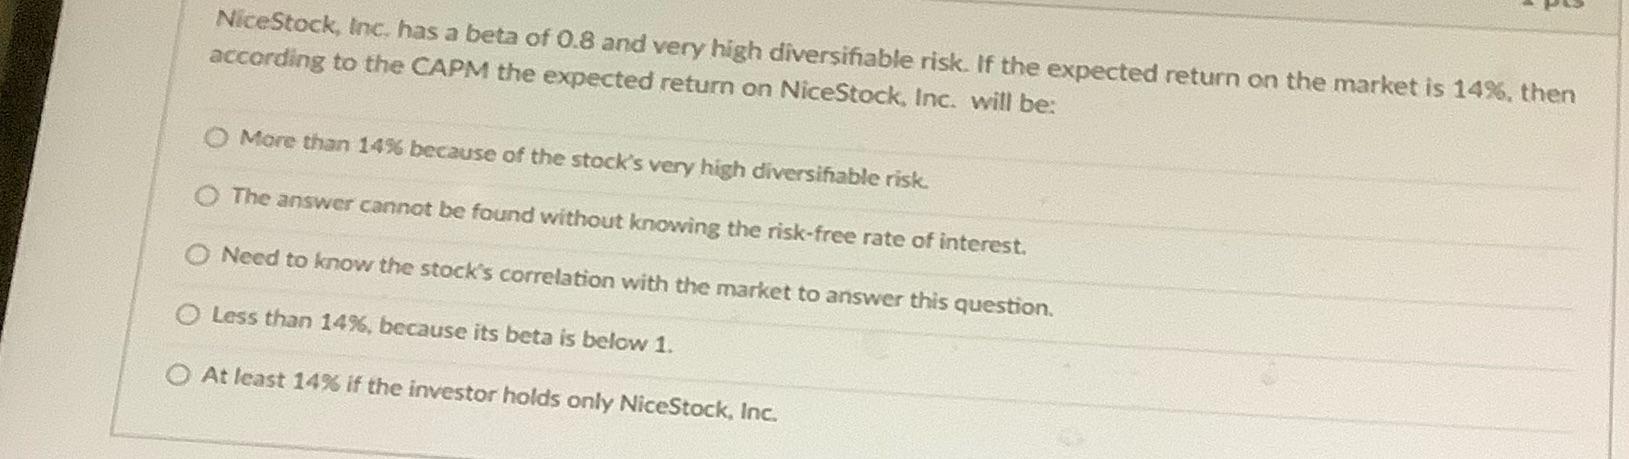 NiceStock, Inc. has a beta of 0.8 and very high diversifiable risk. If the expected return on the market is